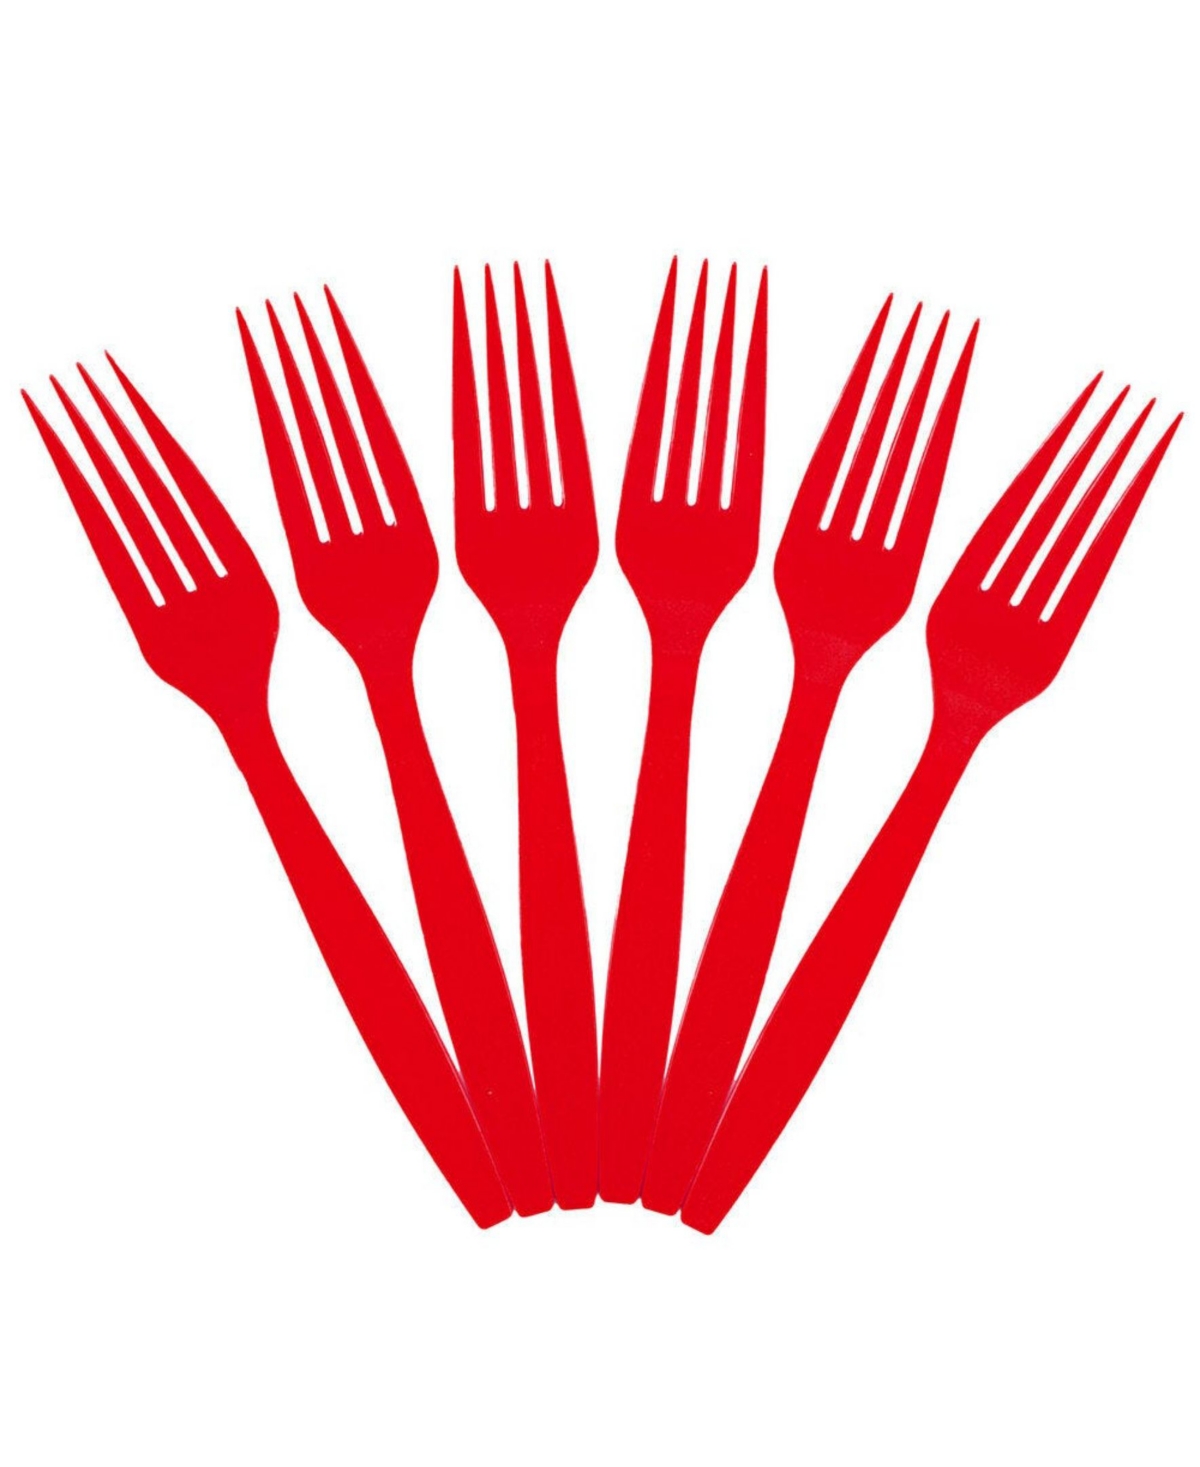 Jam Paper Big Party Pack Of Premium Plastic Forks In Red